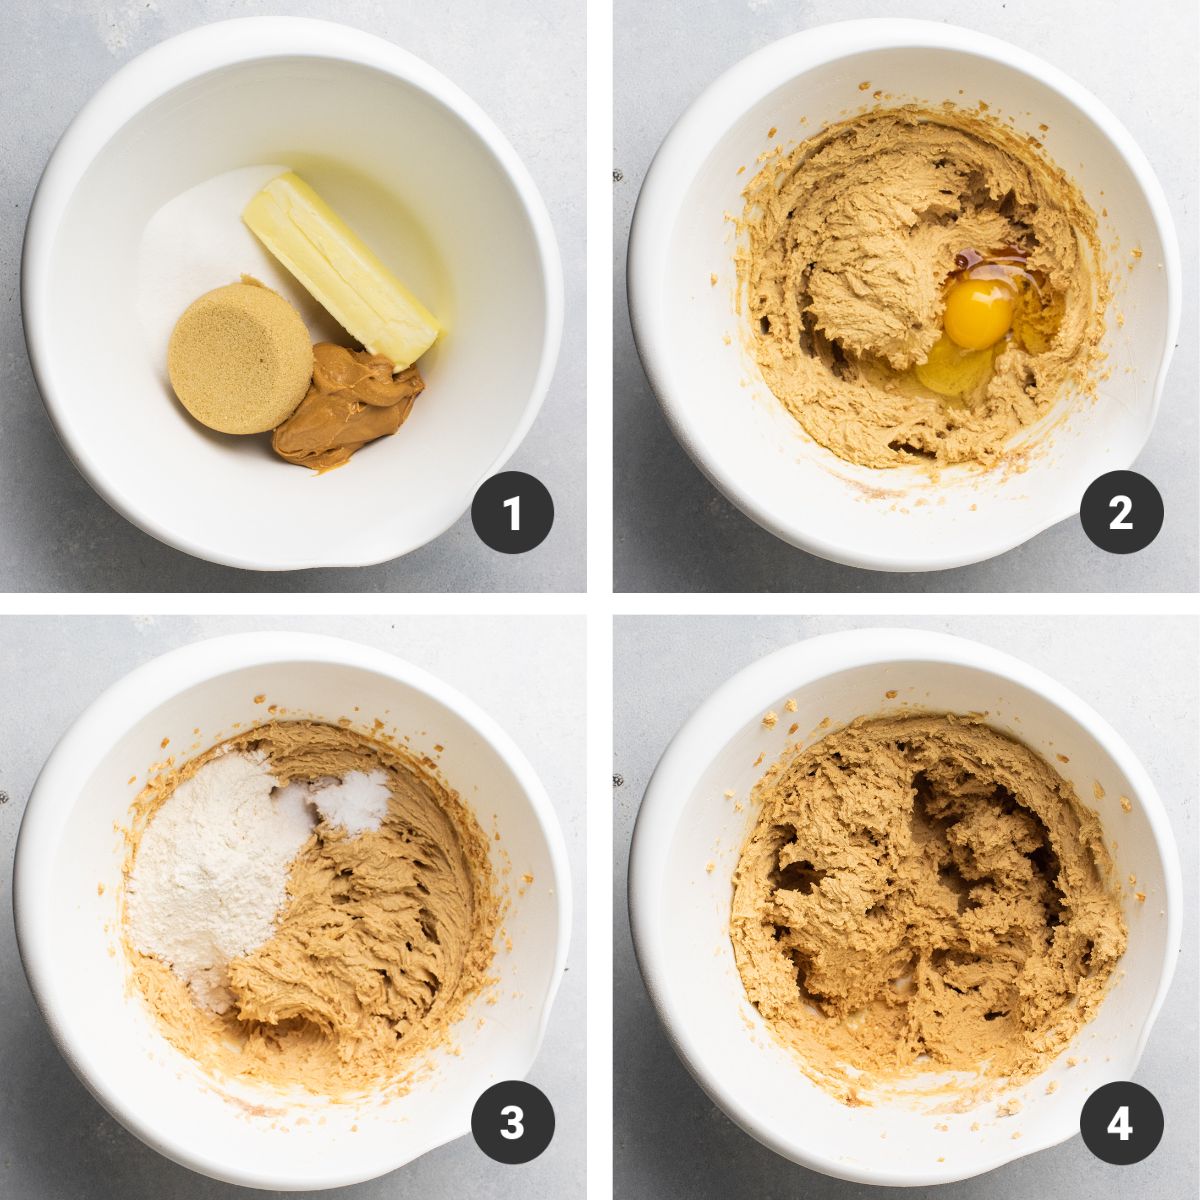 Butter, peanut butter, and sugars in a white mixing bowl.